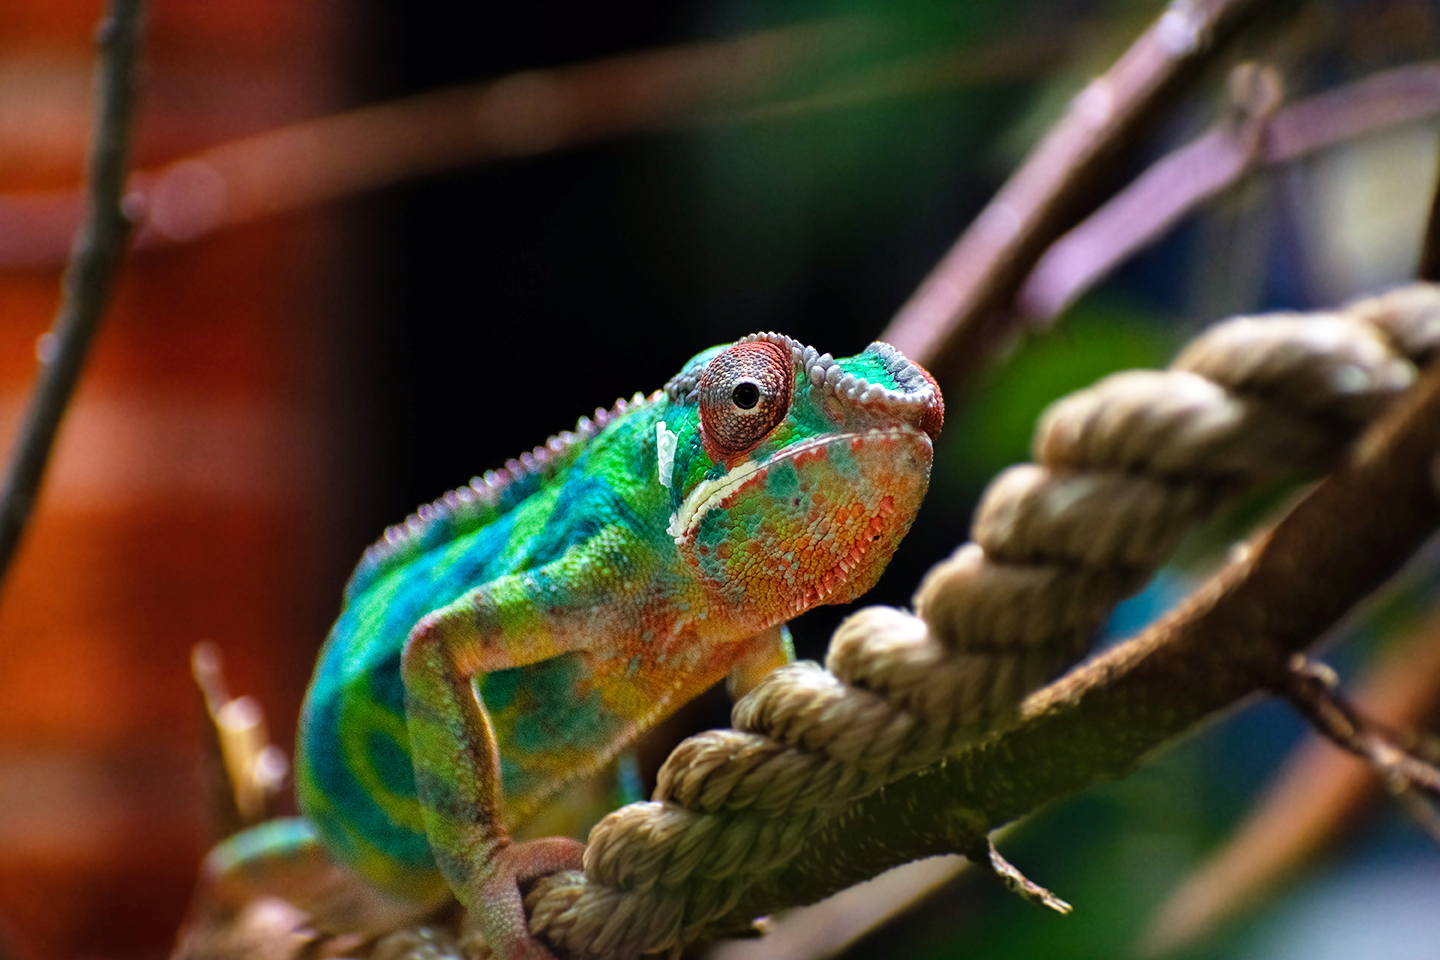 Panther chameleon, Girl George on a rope